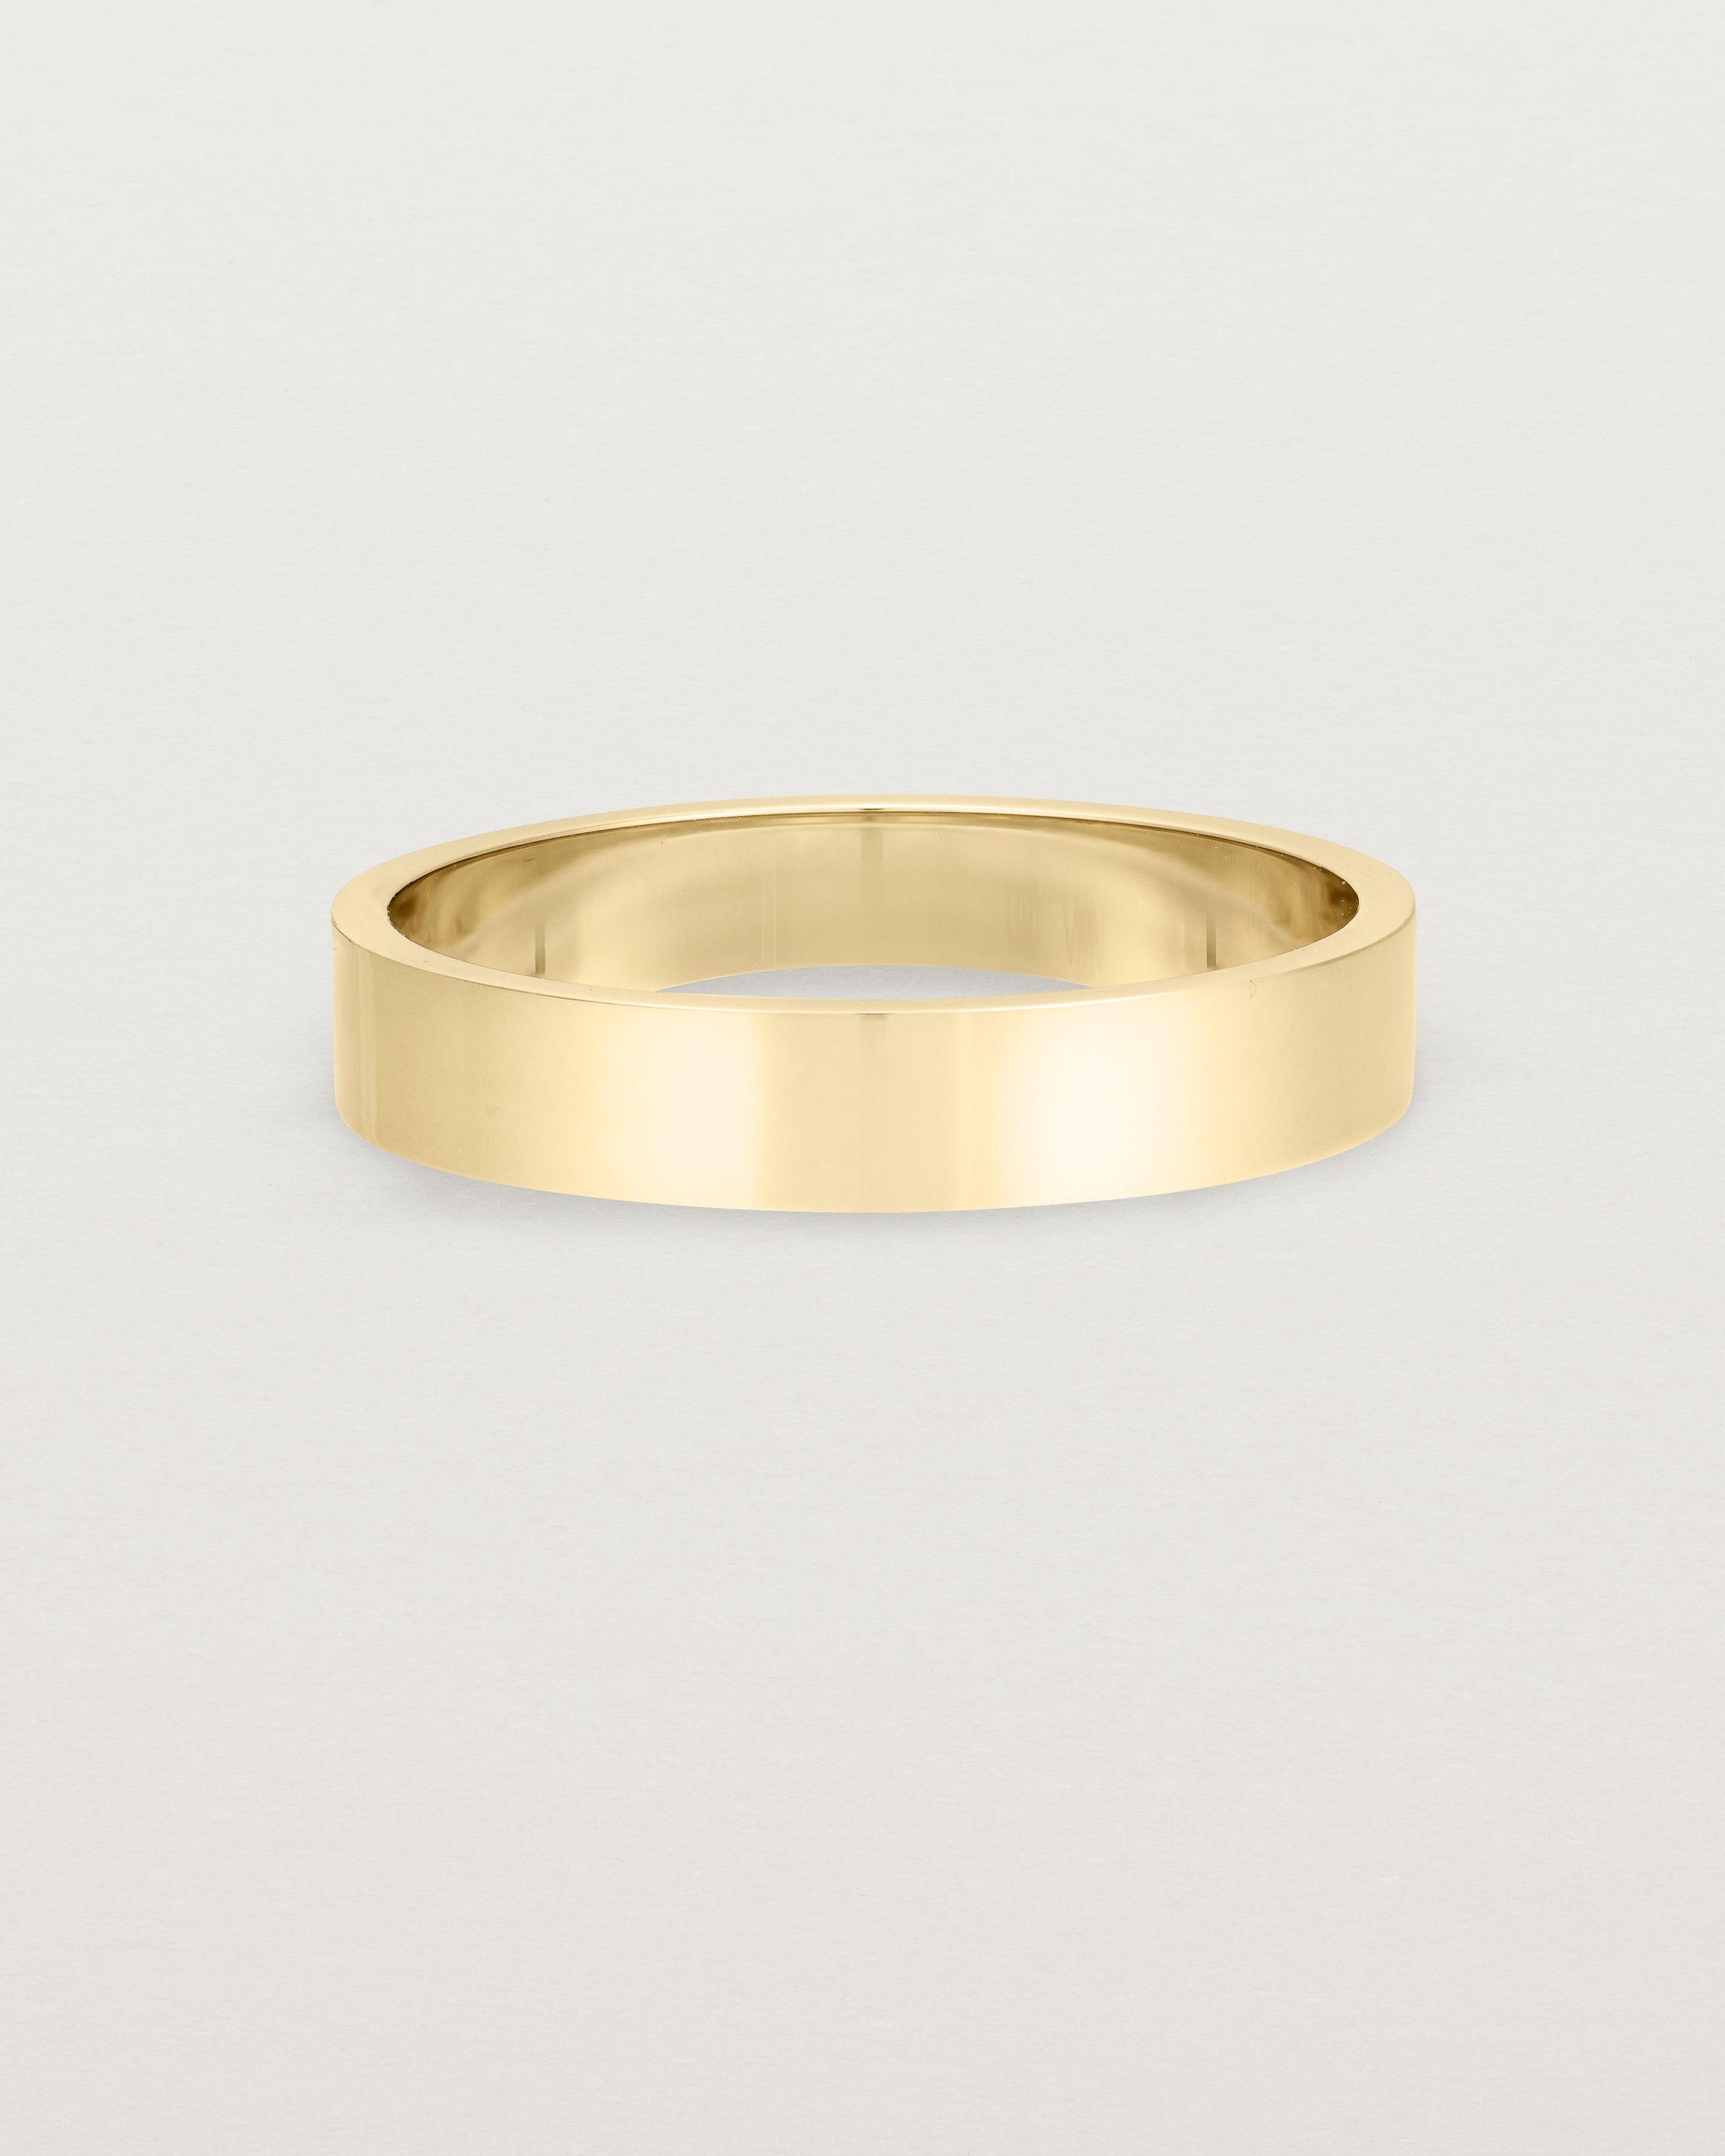 Our square, flat 4mm profile wedding band crafted in yellow gold